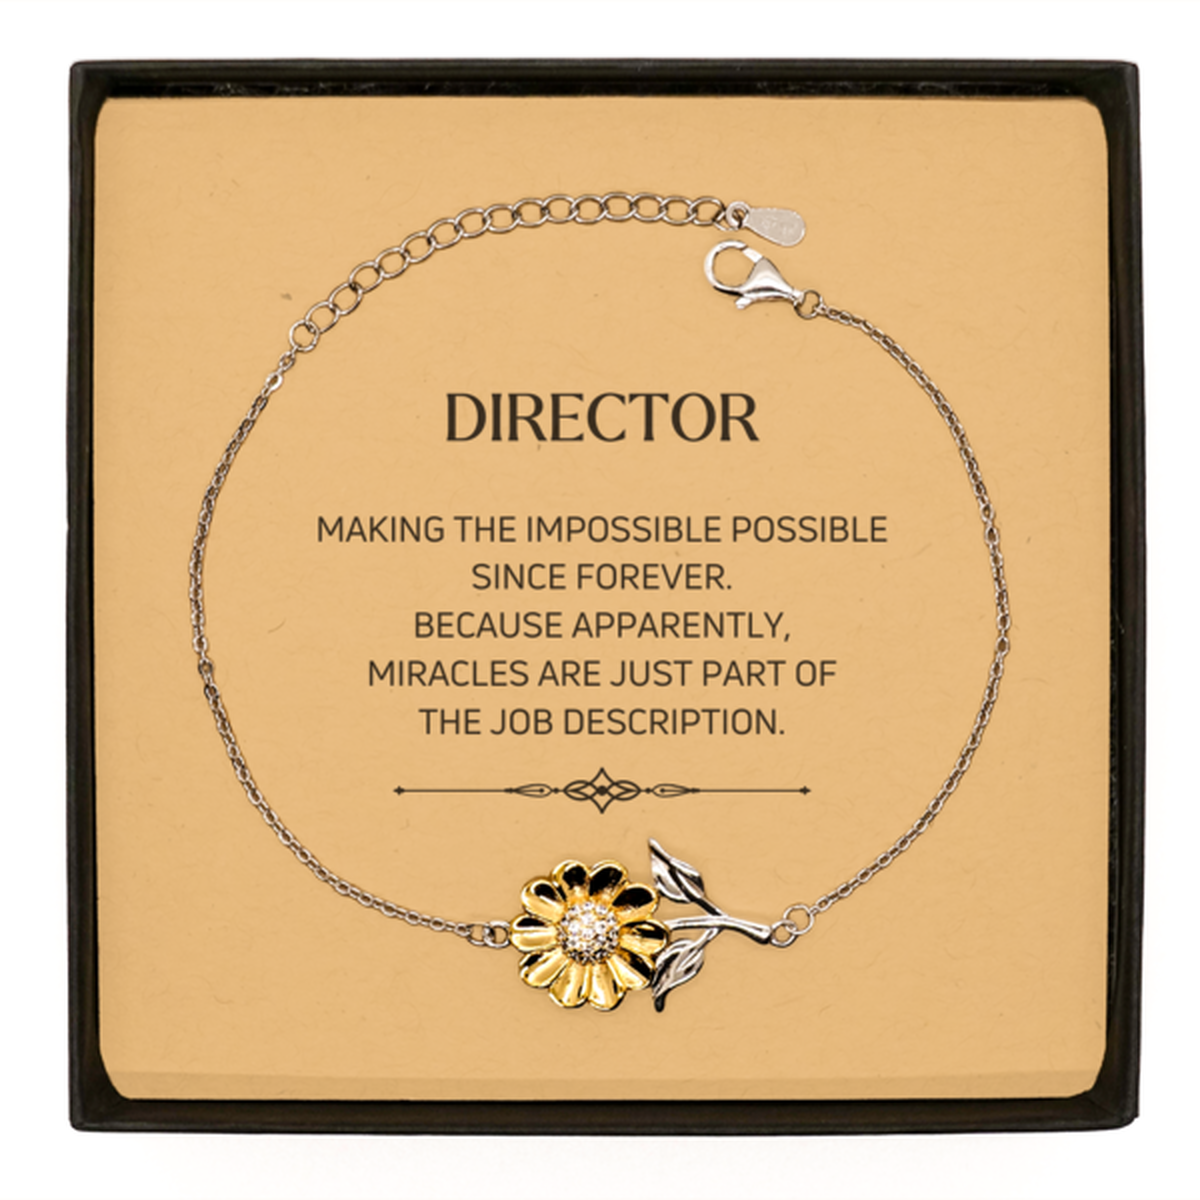 Funny Director Gifts, Miracles are just part of the job description, Inspirational Birthday Sunflower Bracelet For Director, Men, Women, Coworkers, Friends, Boss